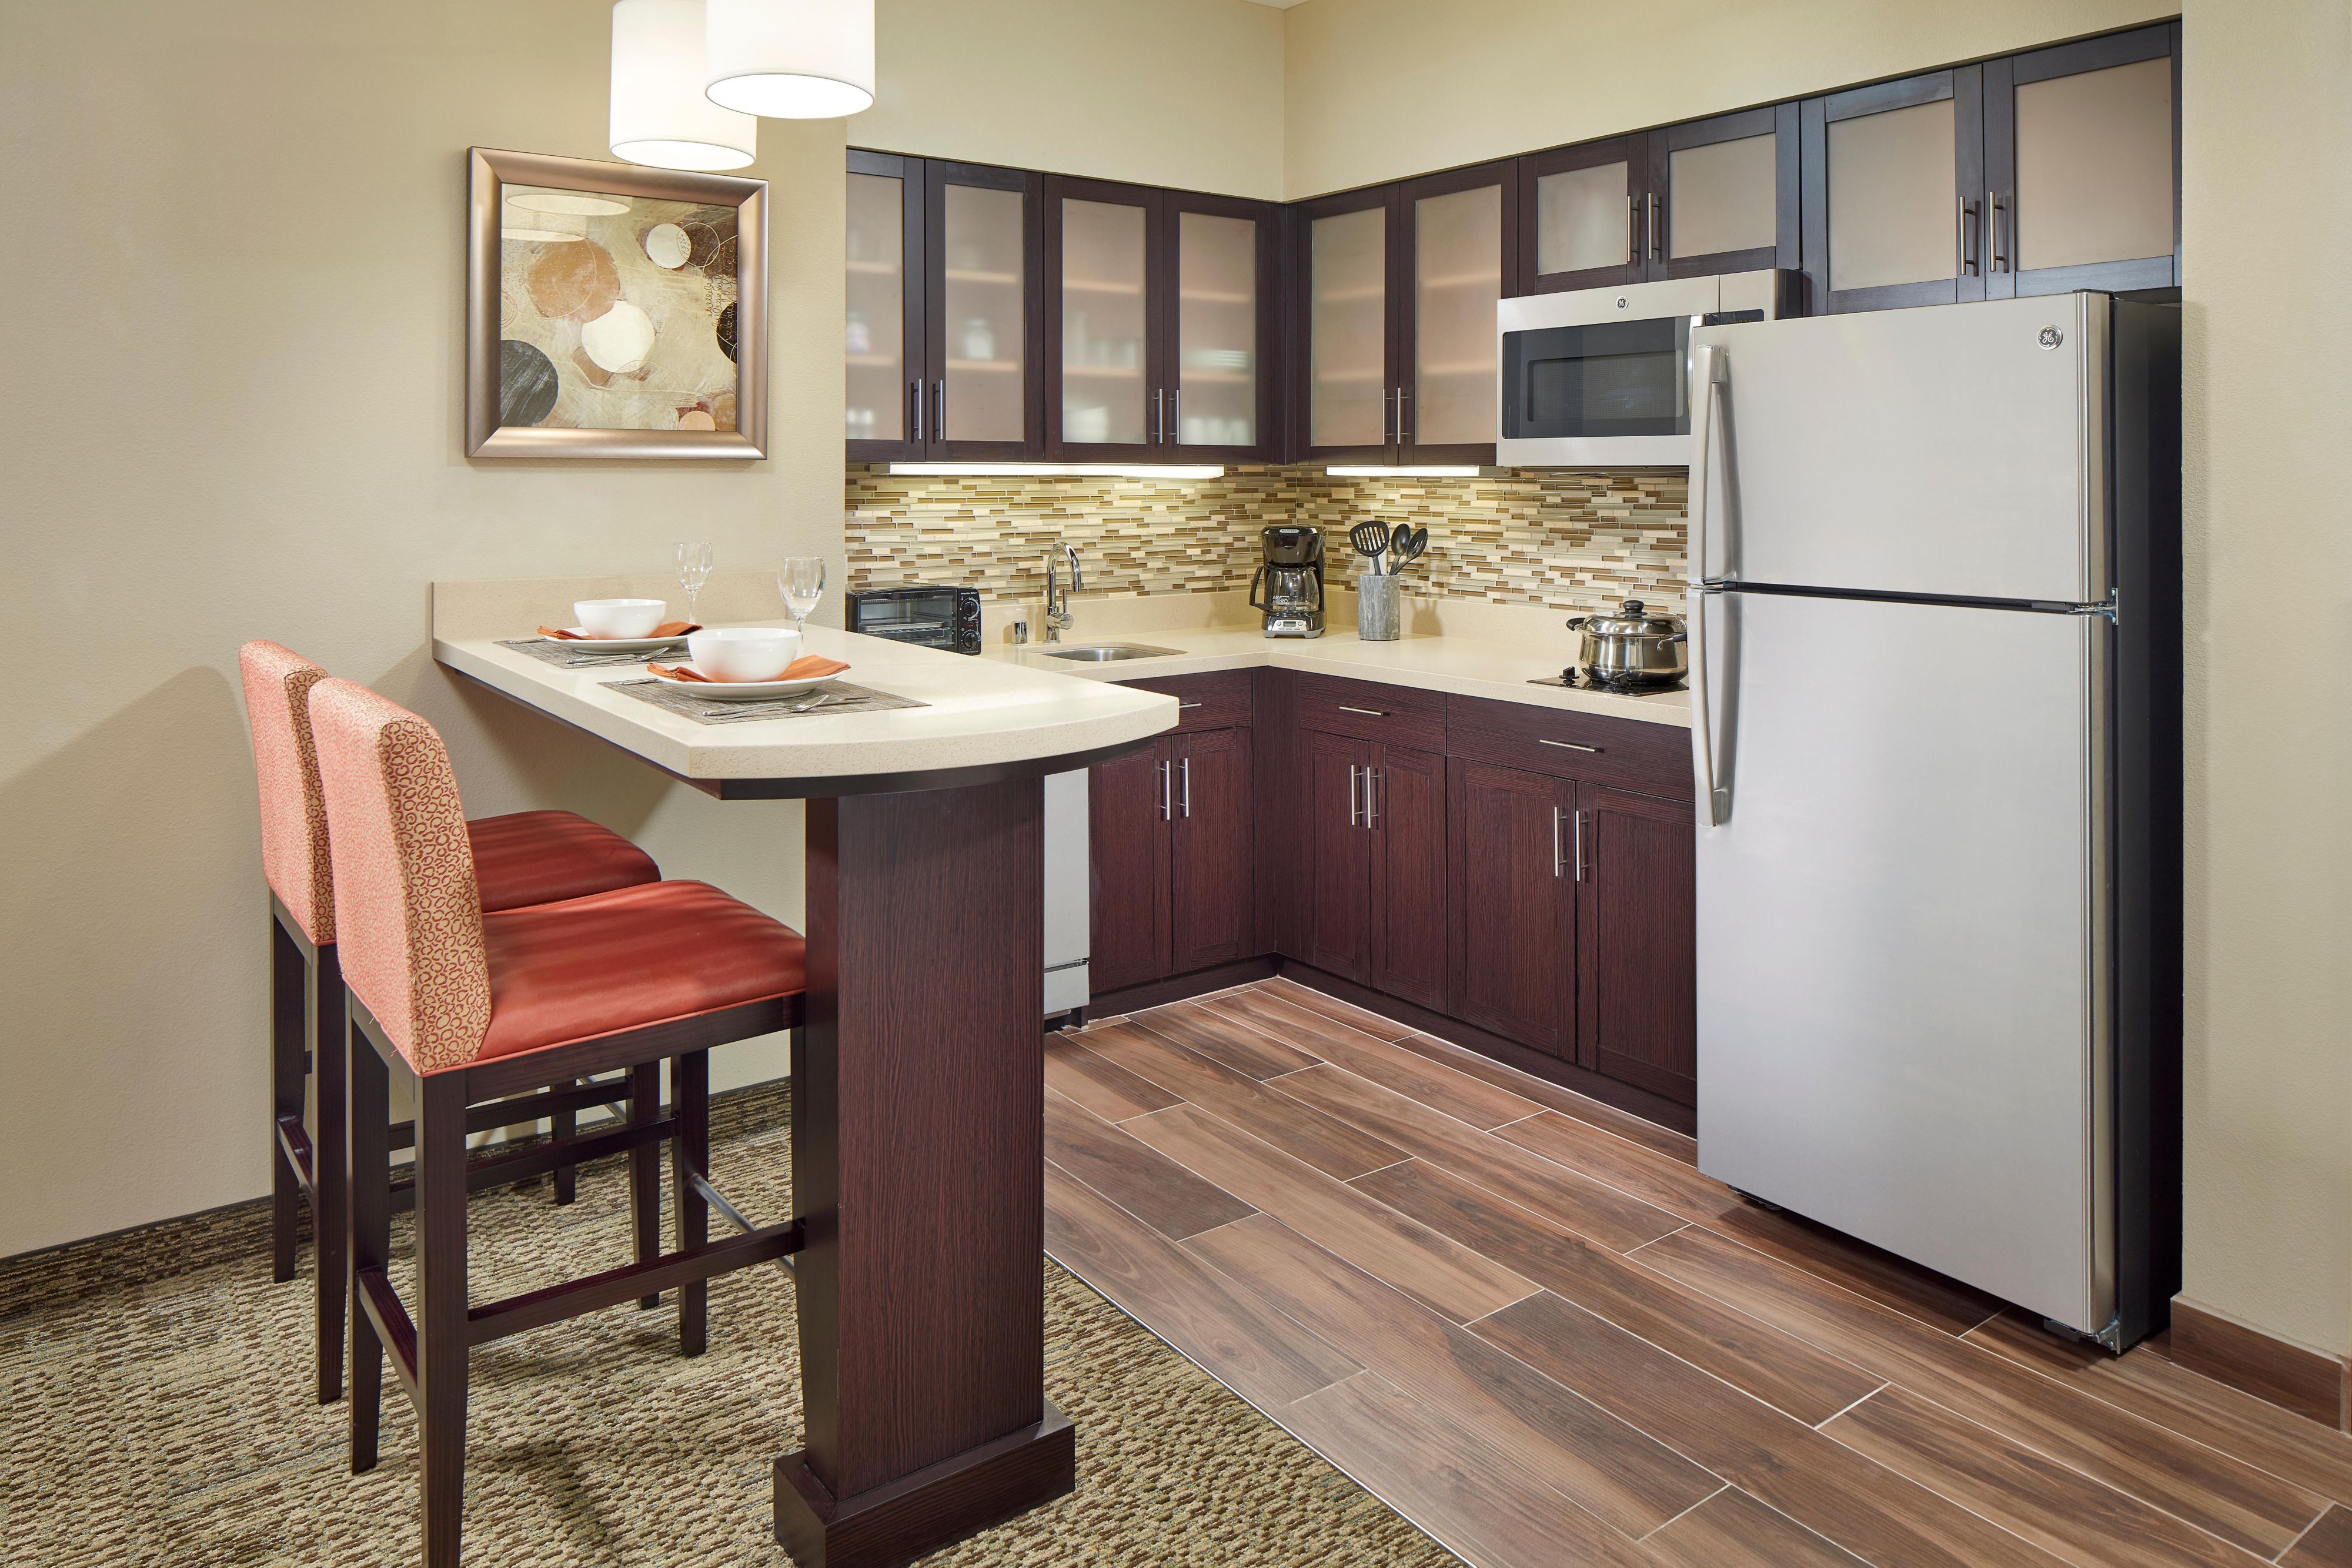 Get the taste of home and make your meals in the comfort of your suite! Our cooktop stove, full-size refrigerator, microwave, dishwasher, garbage disposal, toaster, coffee machine, dishes and utensils make it easy! 